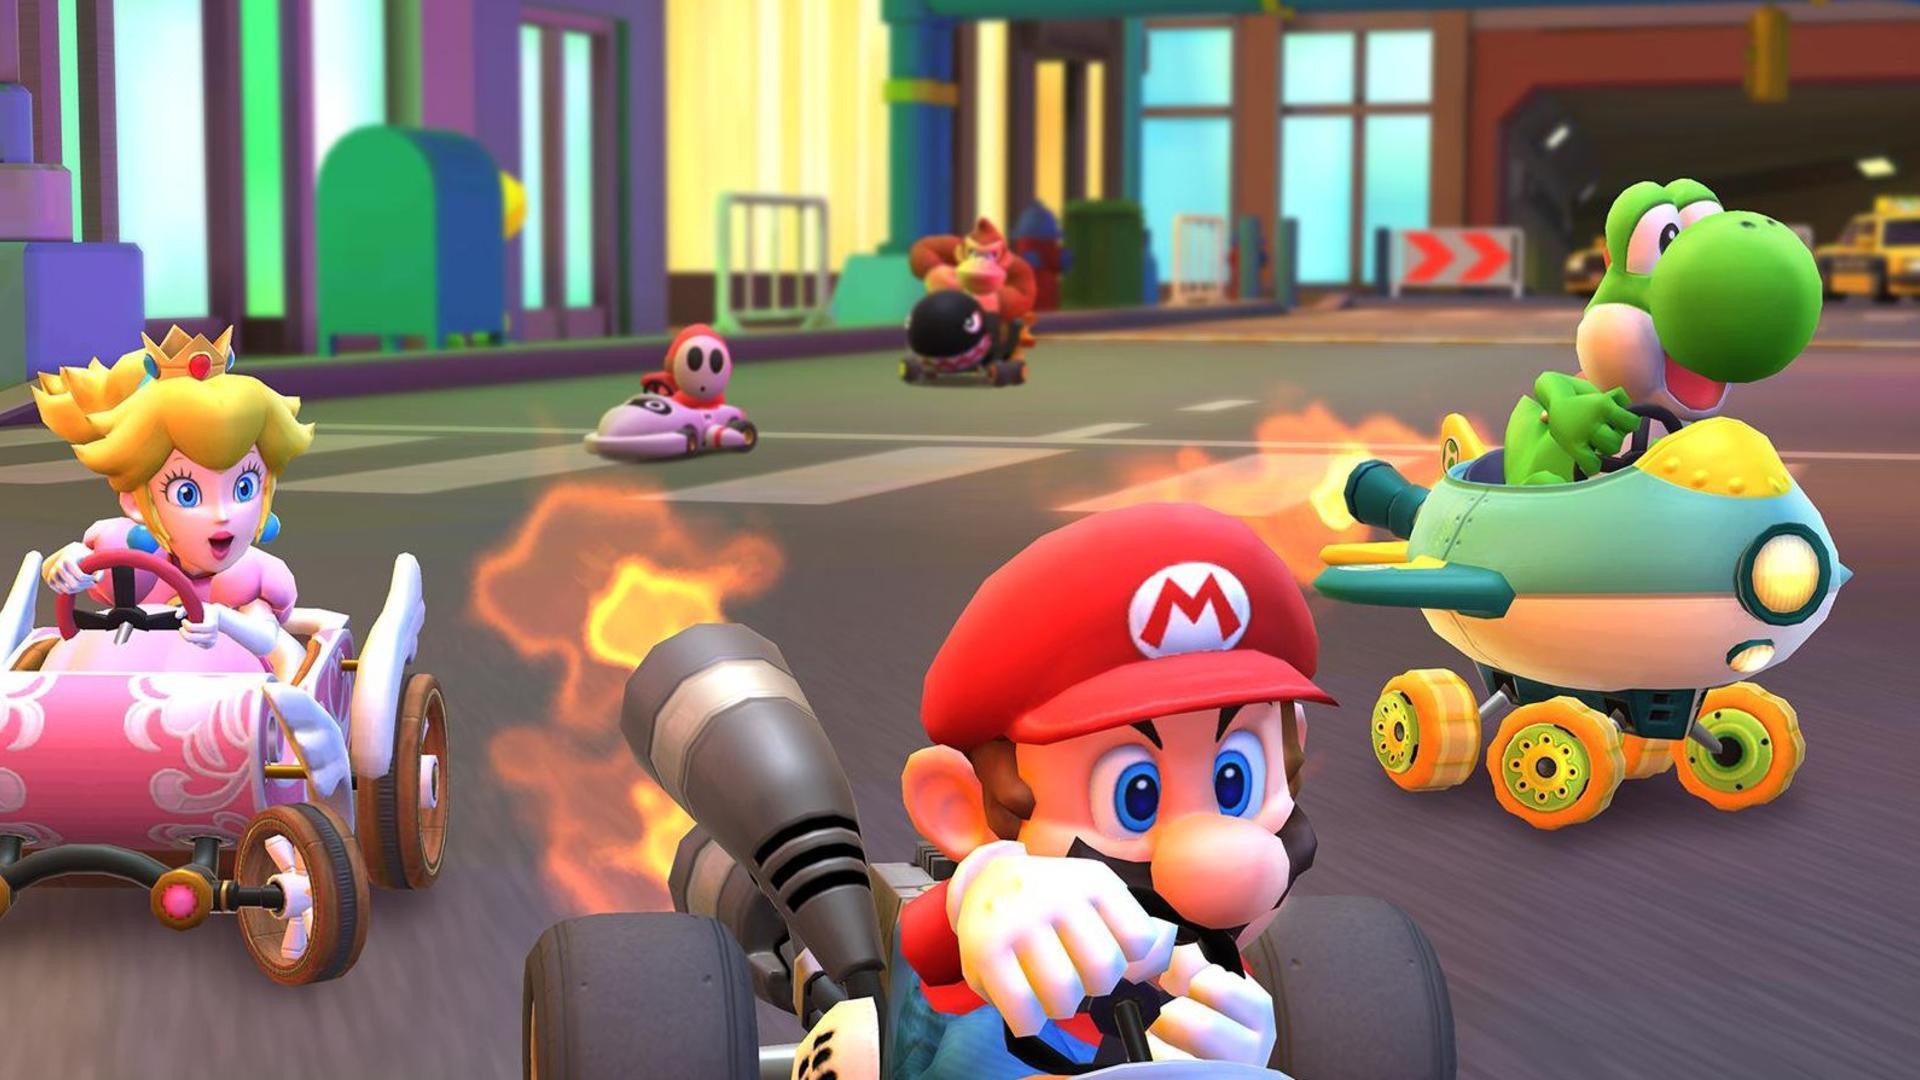 Nintendo reconfirms that online multiplayer is coming to